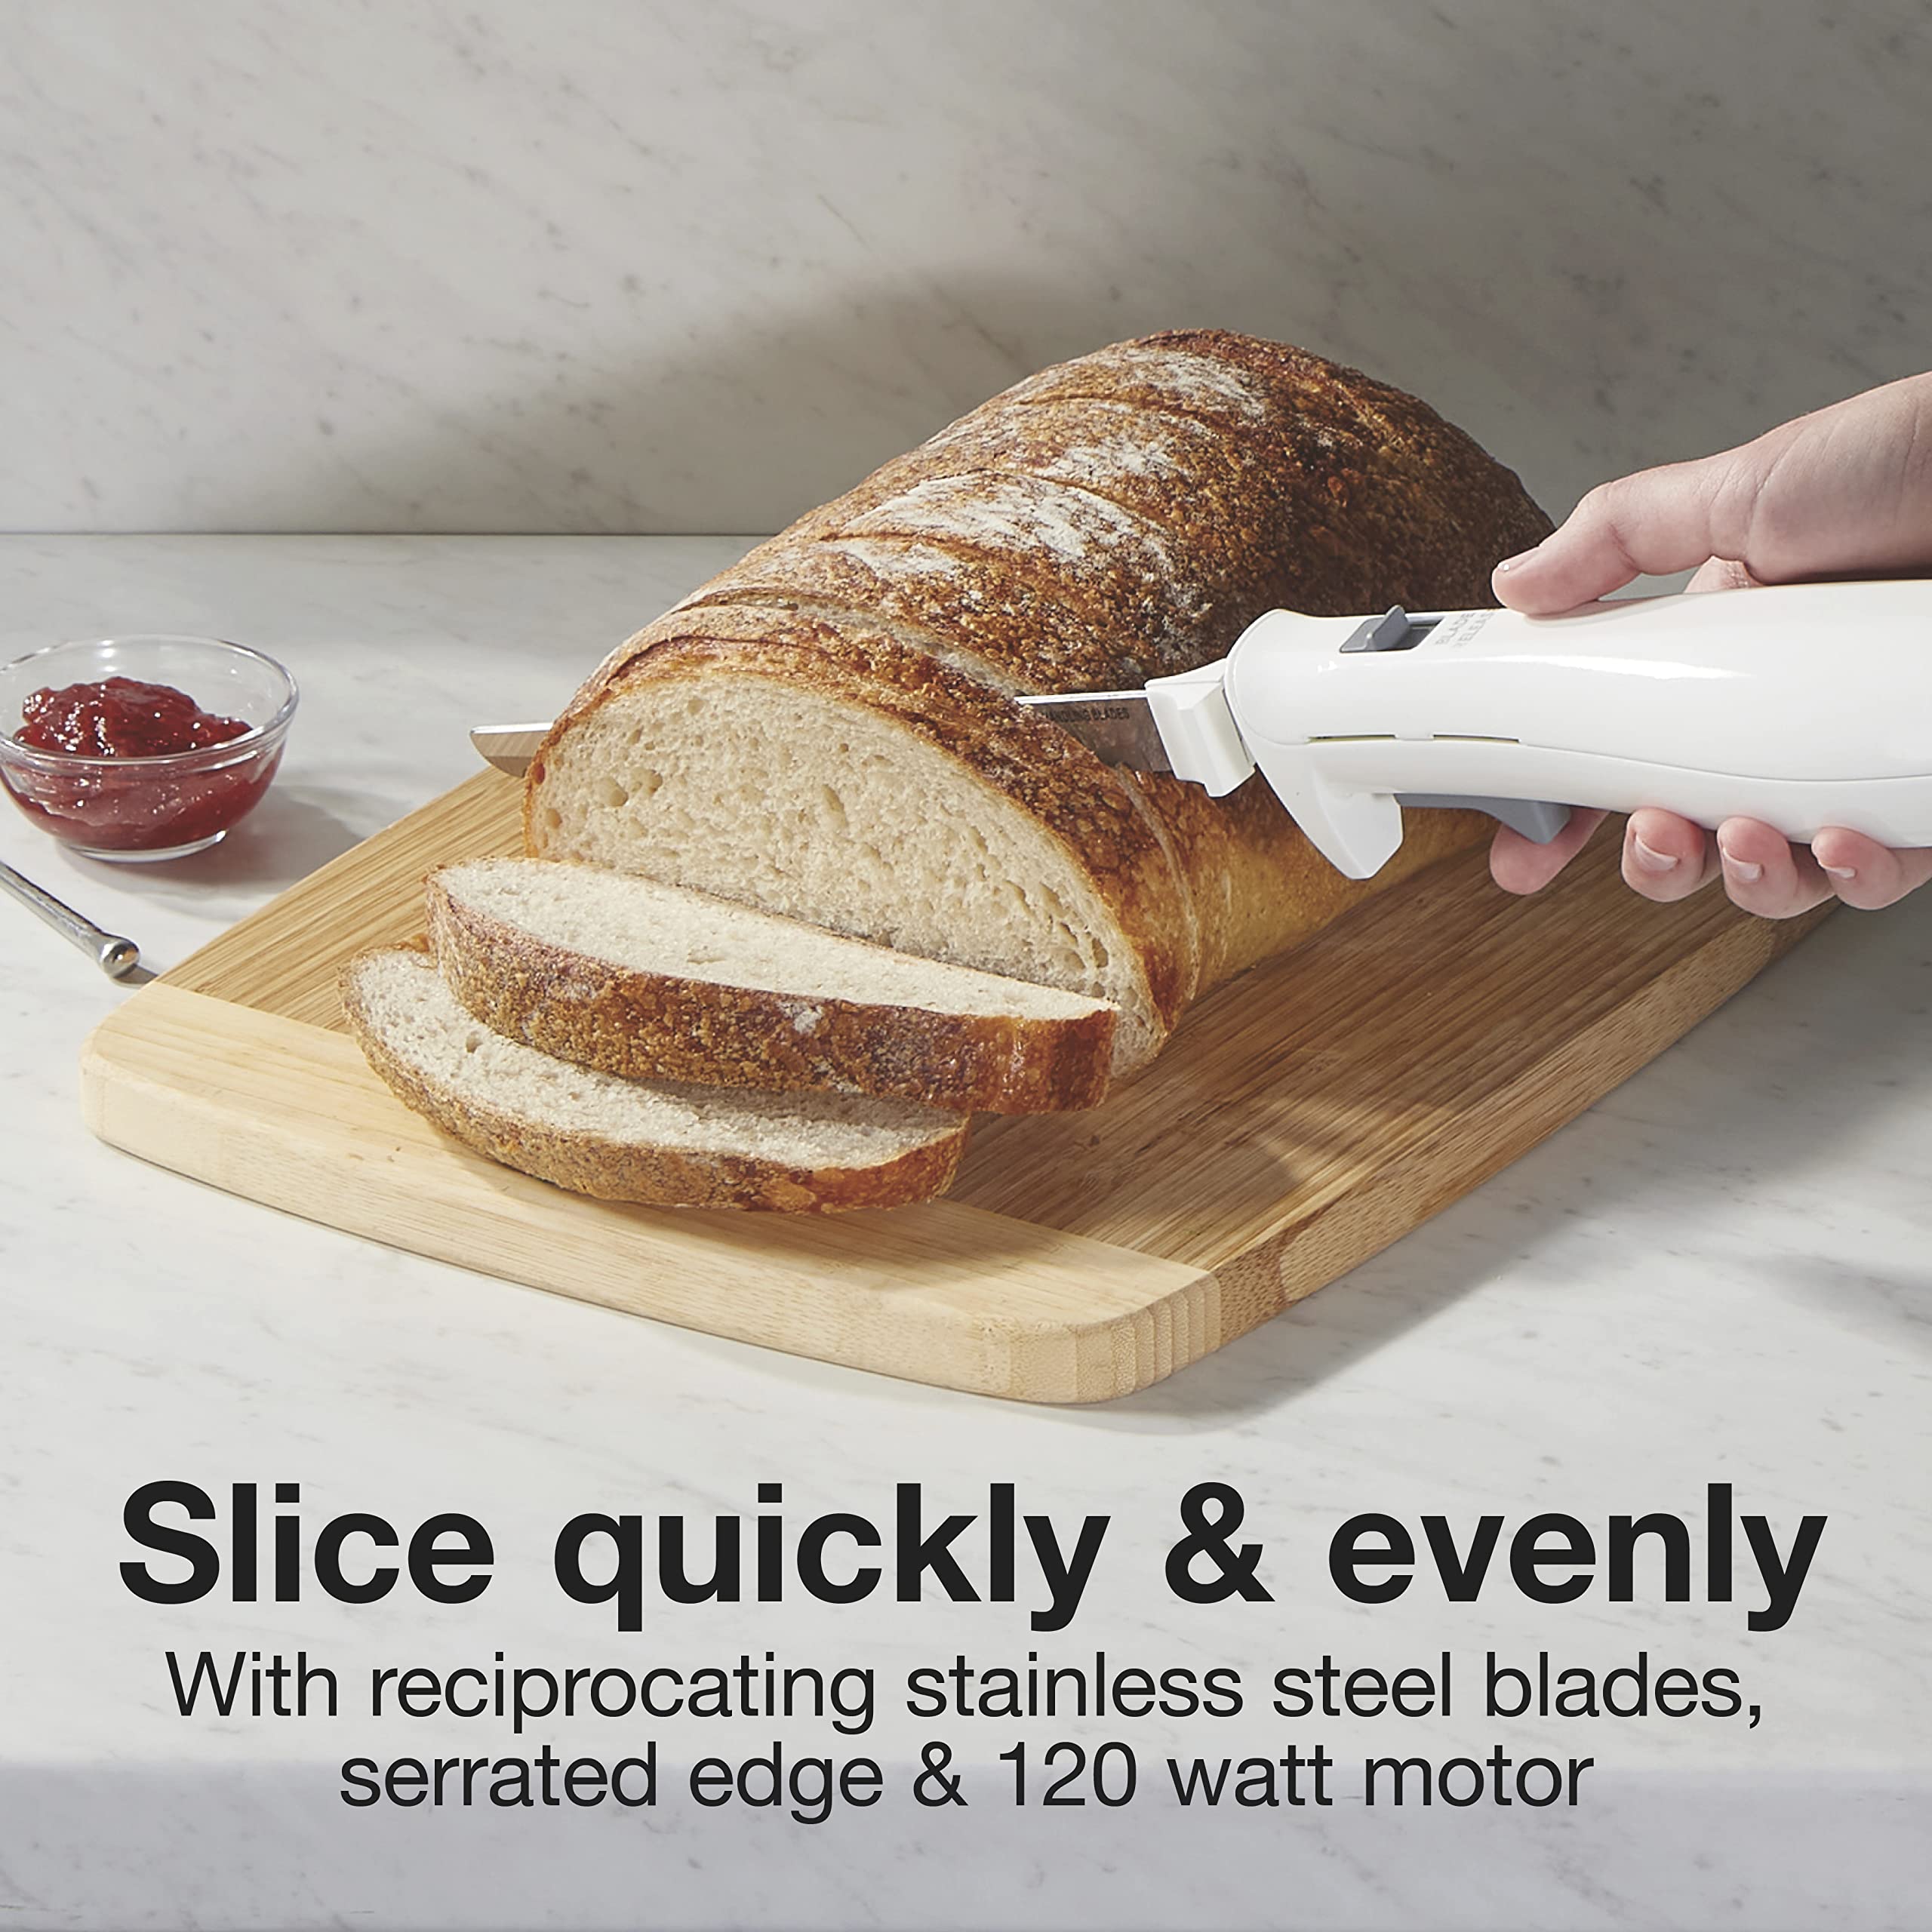 Proctor Silex Easy Slice Electric Knife for Carving Meats, Poultry, Bread, Crafting Foam and More, Lightweight with Contoured Grip, White